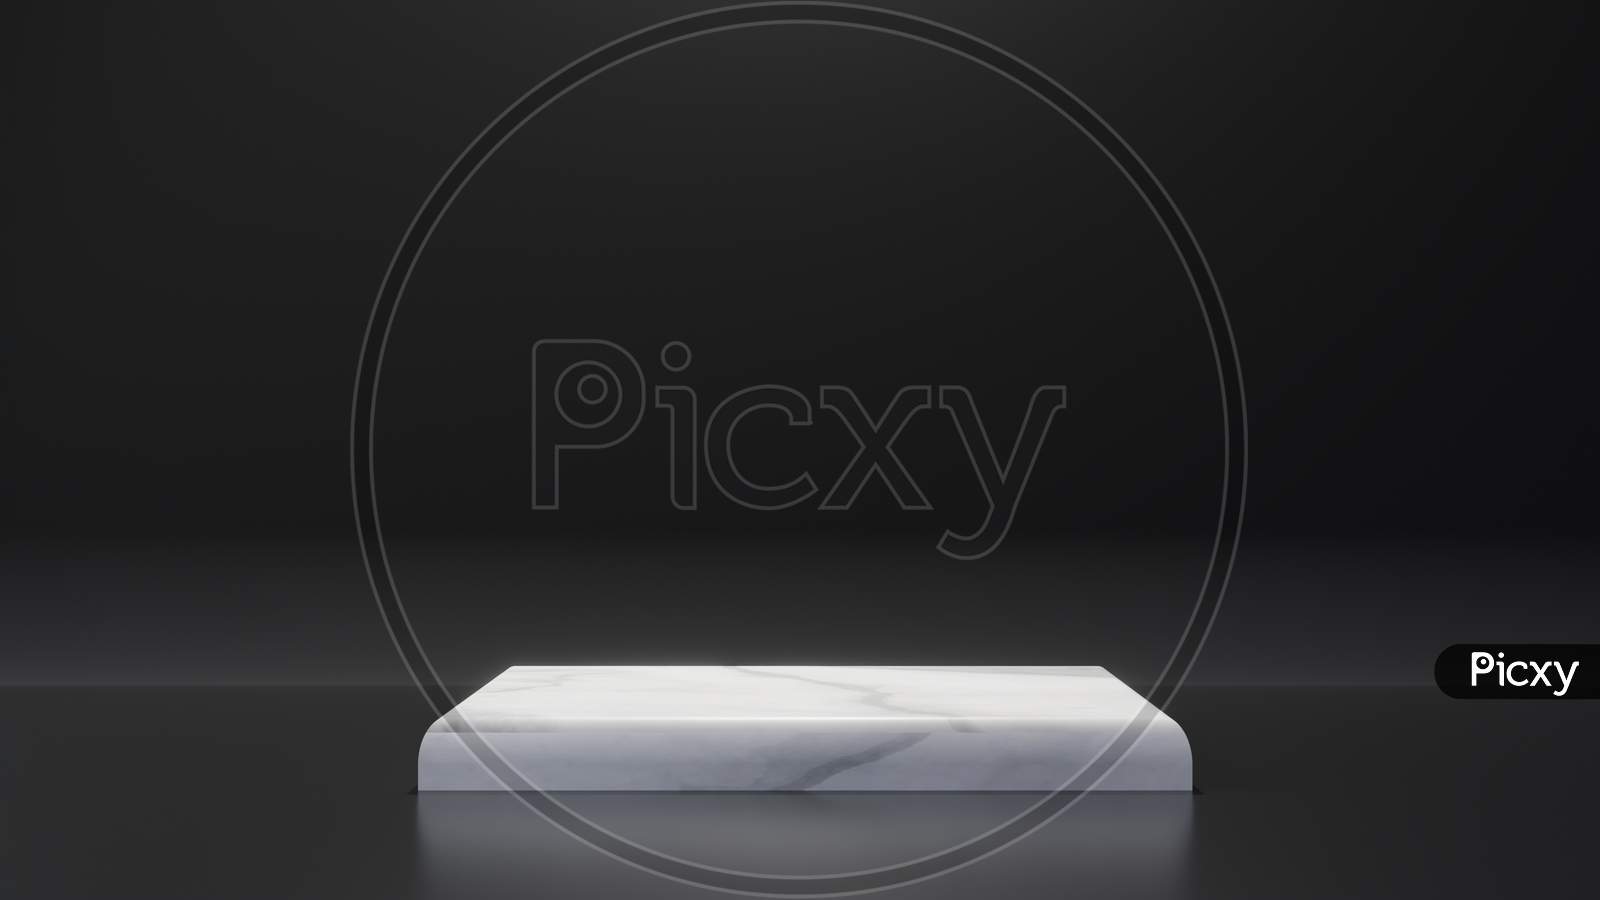 White Marble Product Rectangle Table Stand On Black Background. Abstract Minimal Geometry Concept. Studio Podium Platform. Exhibition And Business Presentation Stage. 3D Illustration Render Graphic